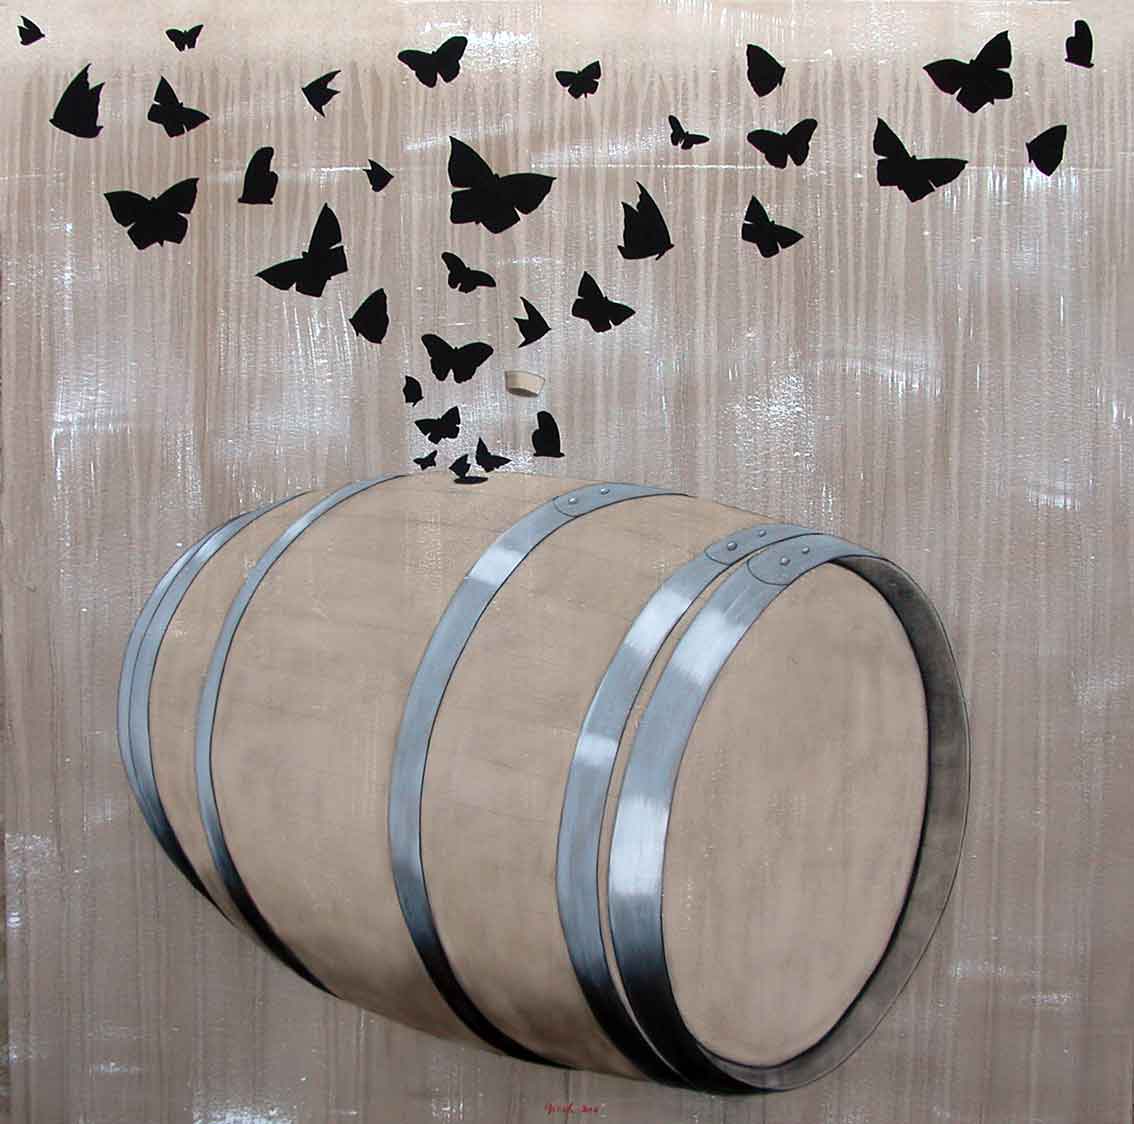 SOTB Barrel-butterfly Thierry Bisch Contemporary painter animals painting art  nature biodiversity conservation 